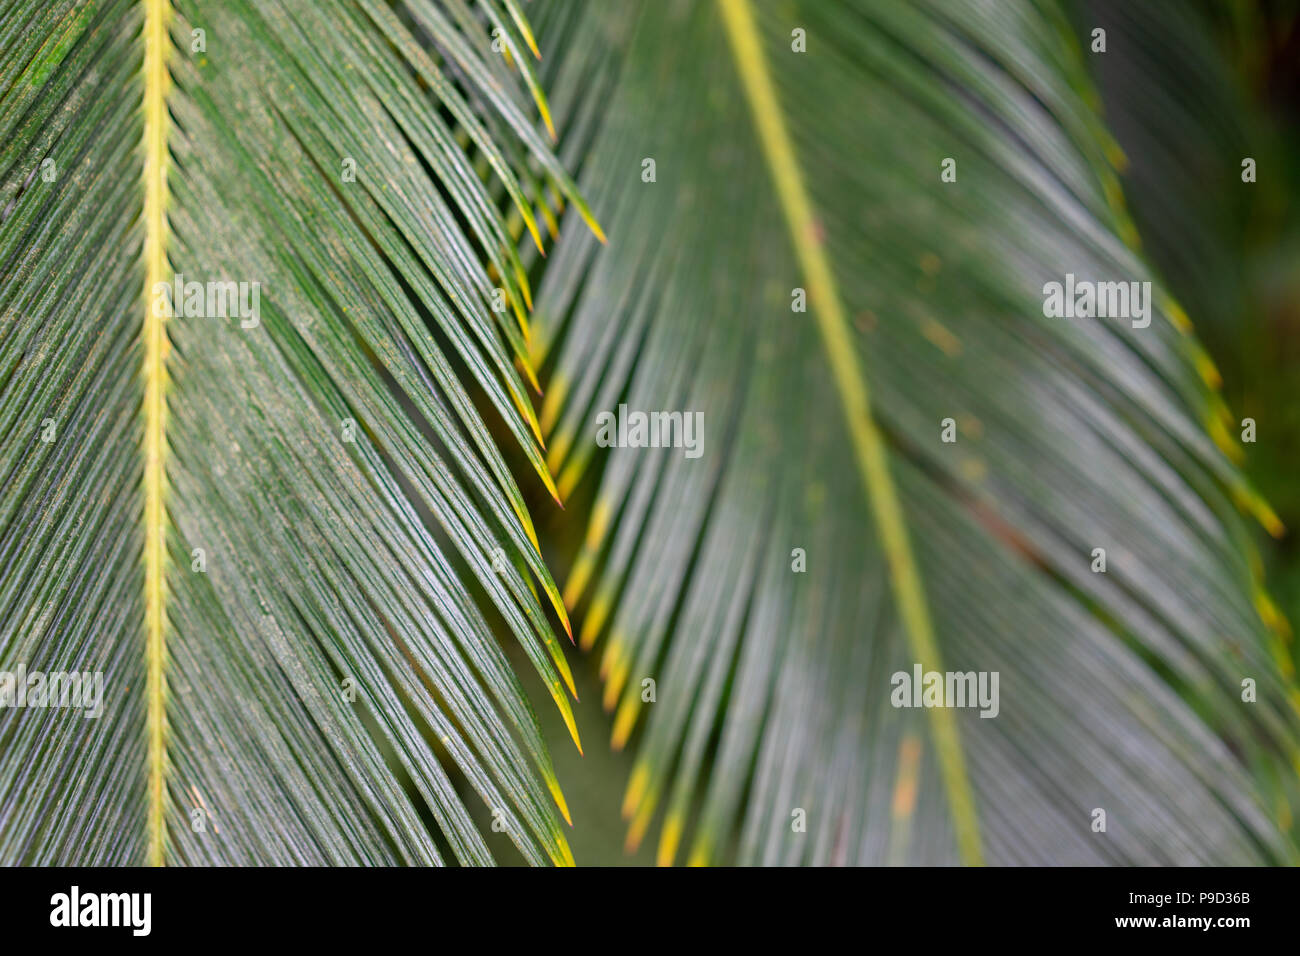 abstract leaf pattern close up view from tropical palm tree Stock Photo